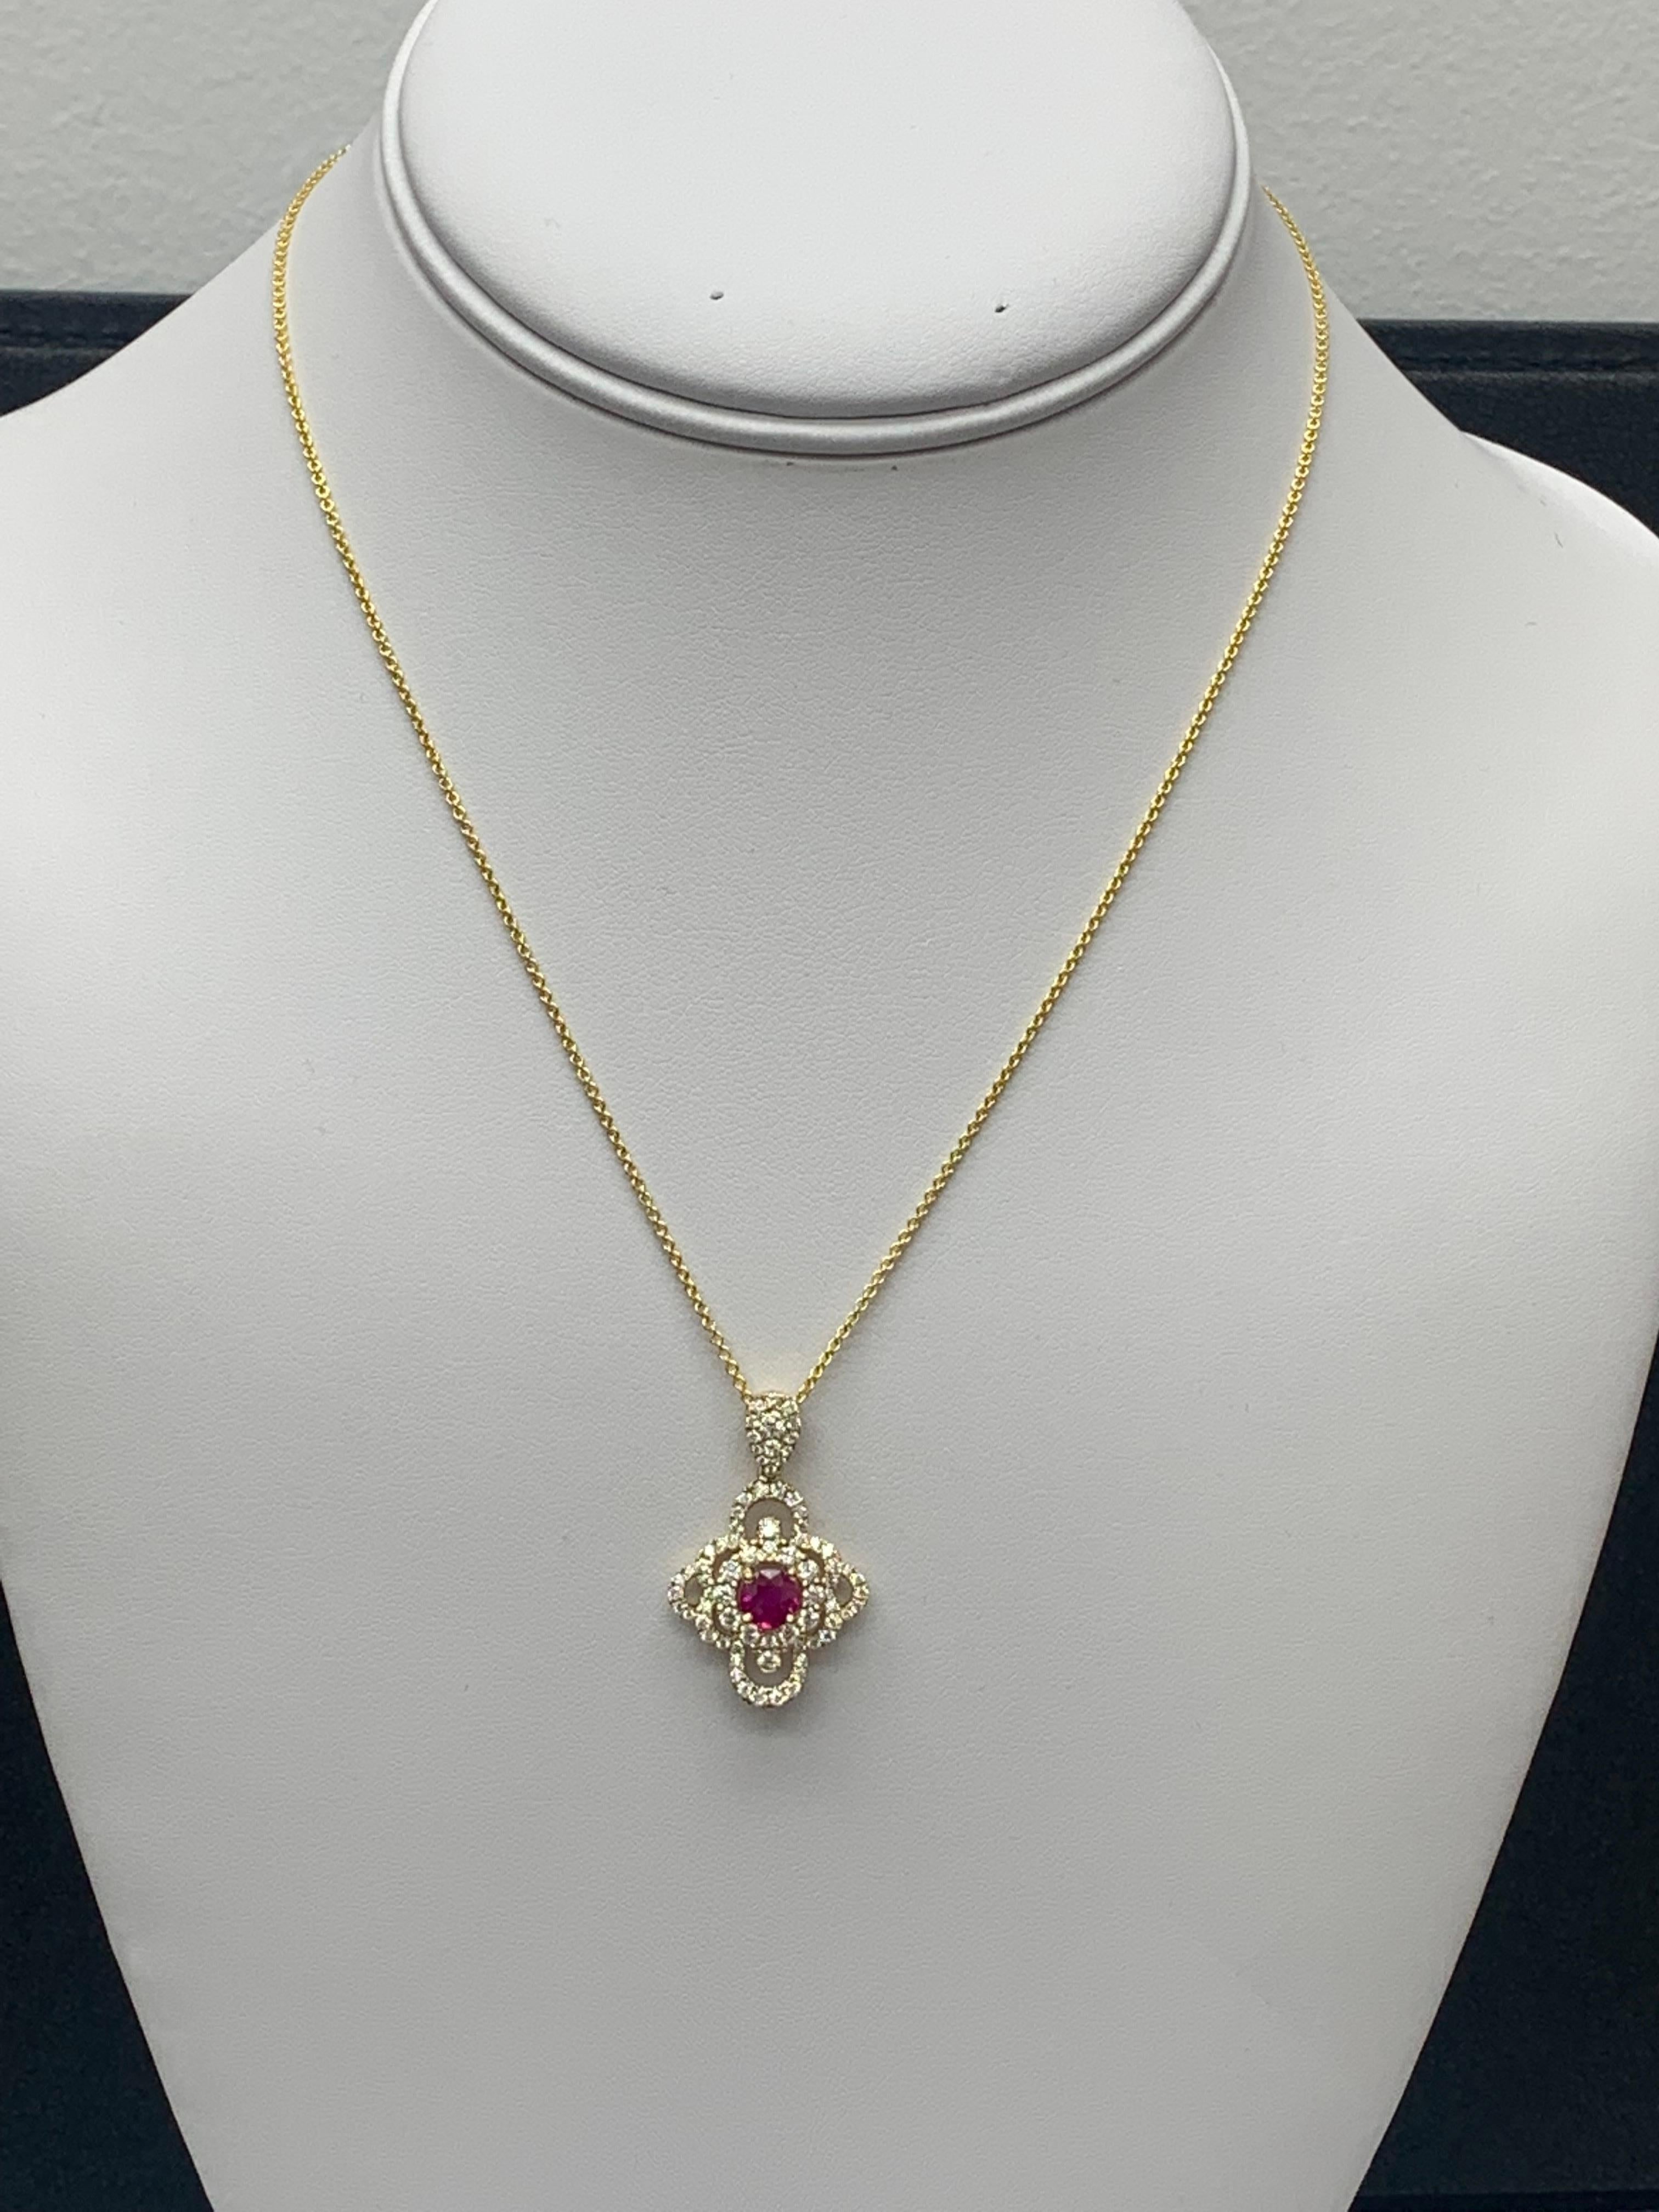 0.67 Carat Round Cut Ruby and Diamond Pendant Necklace in 18K Yellow Gold For Sale 4